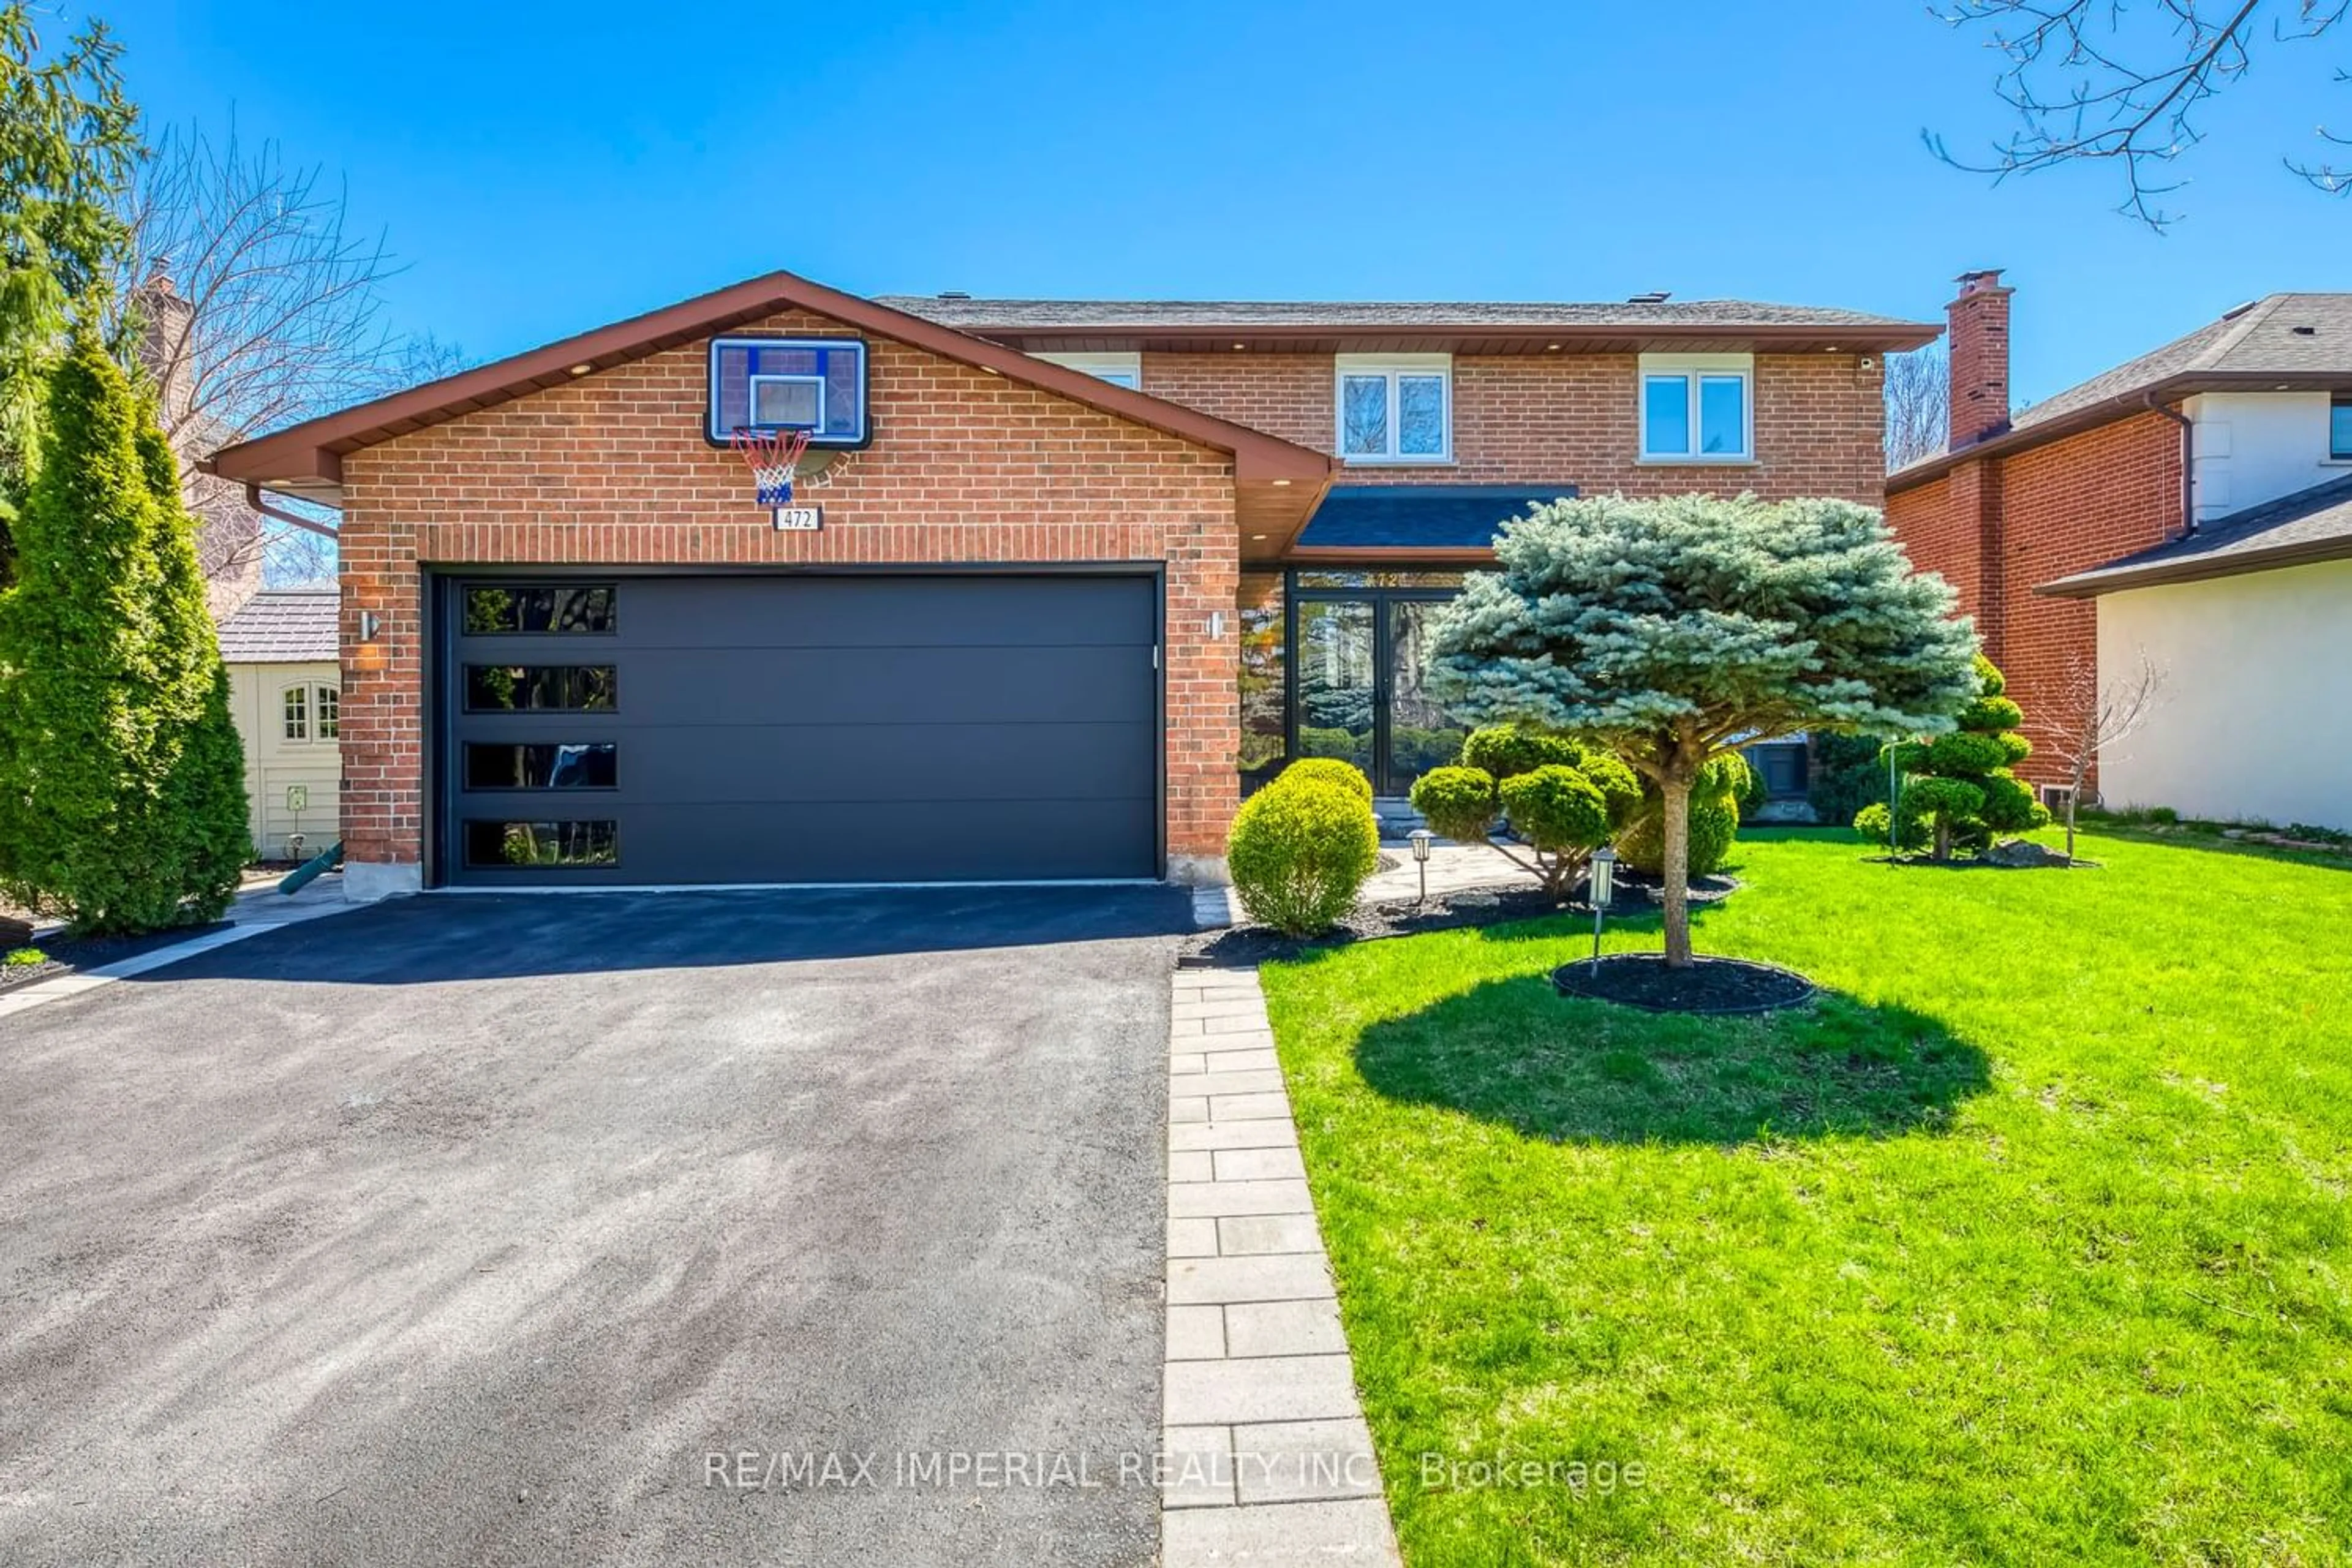 Home with brick exterior material for 472 Aspen Forest Dr, Oakville Ontario L6J 6H6